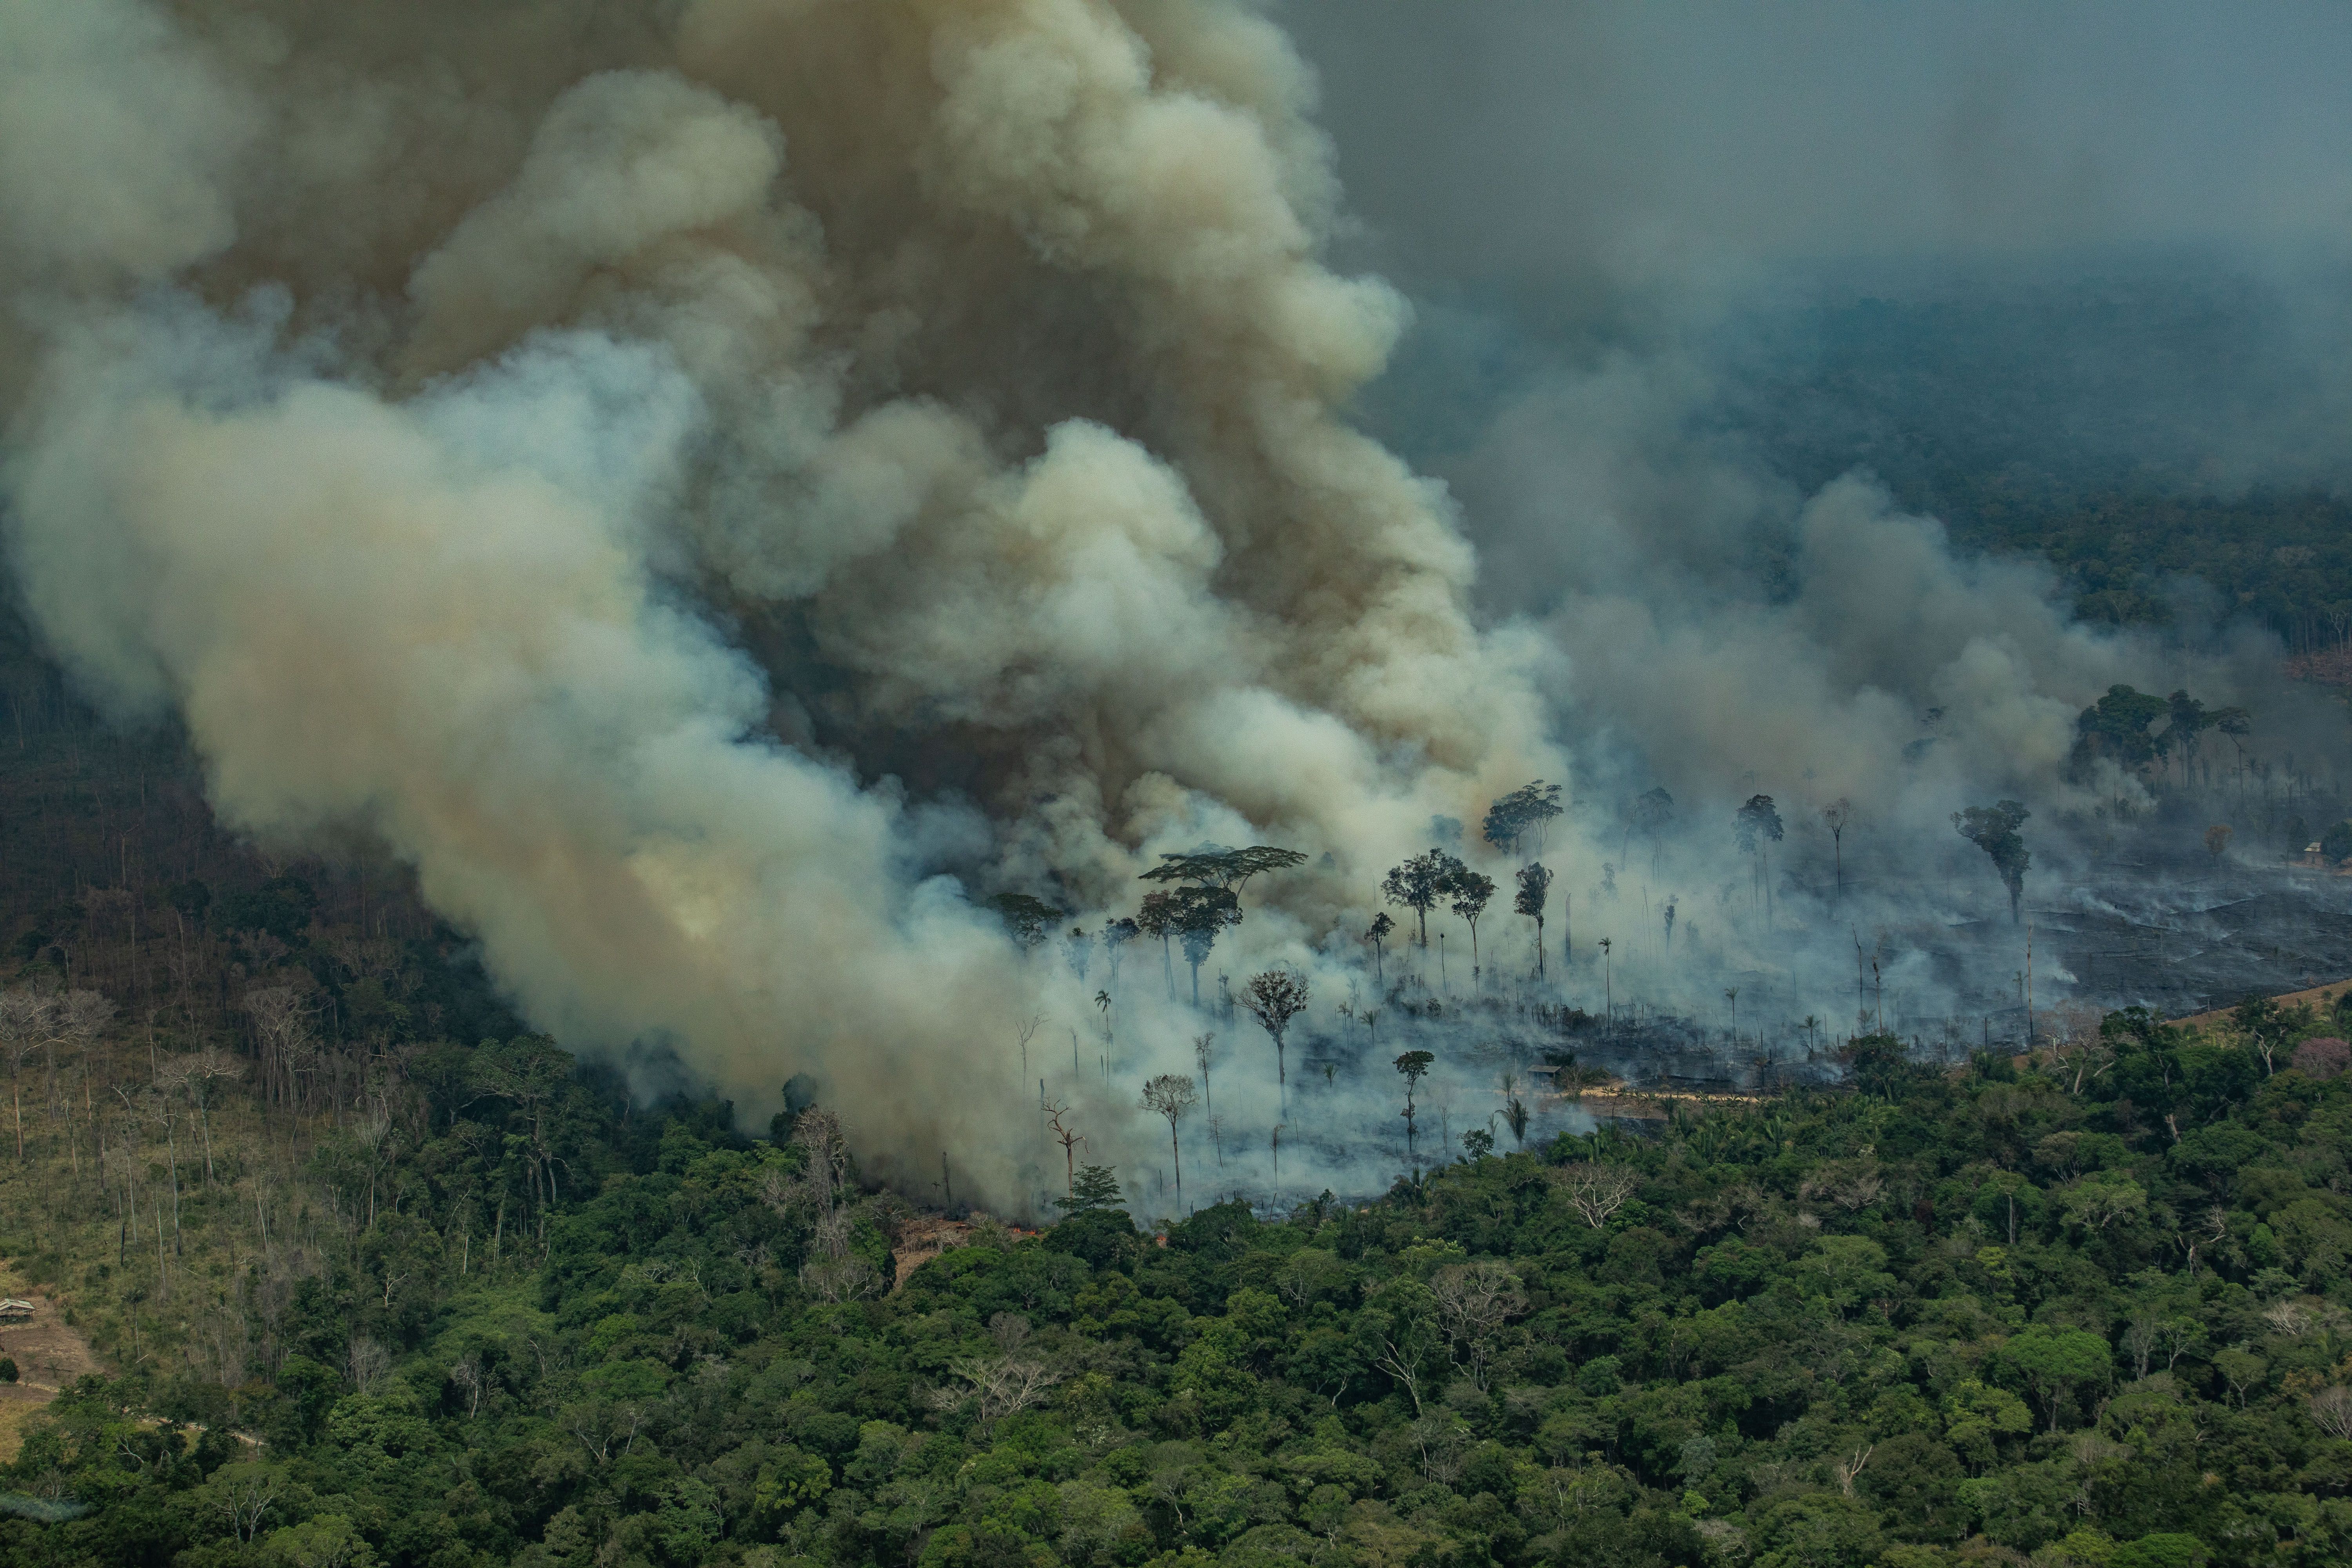 FOREST FIRES IN THE AMAZON STATE OF RONDONIA IN 2019